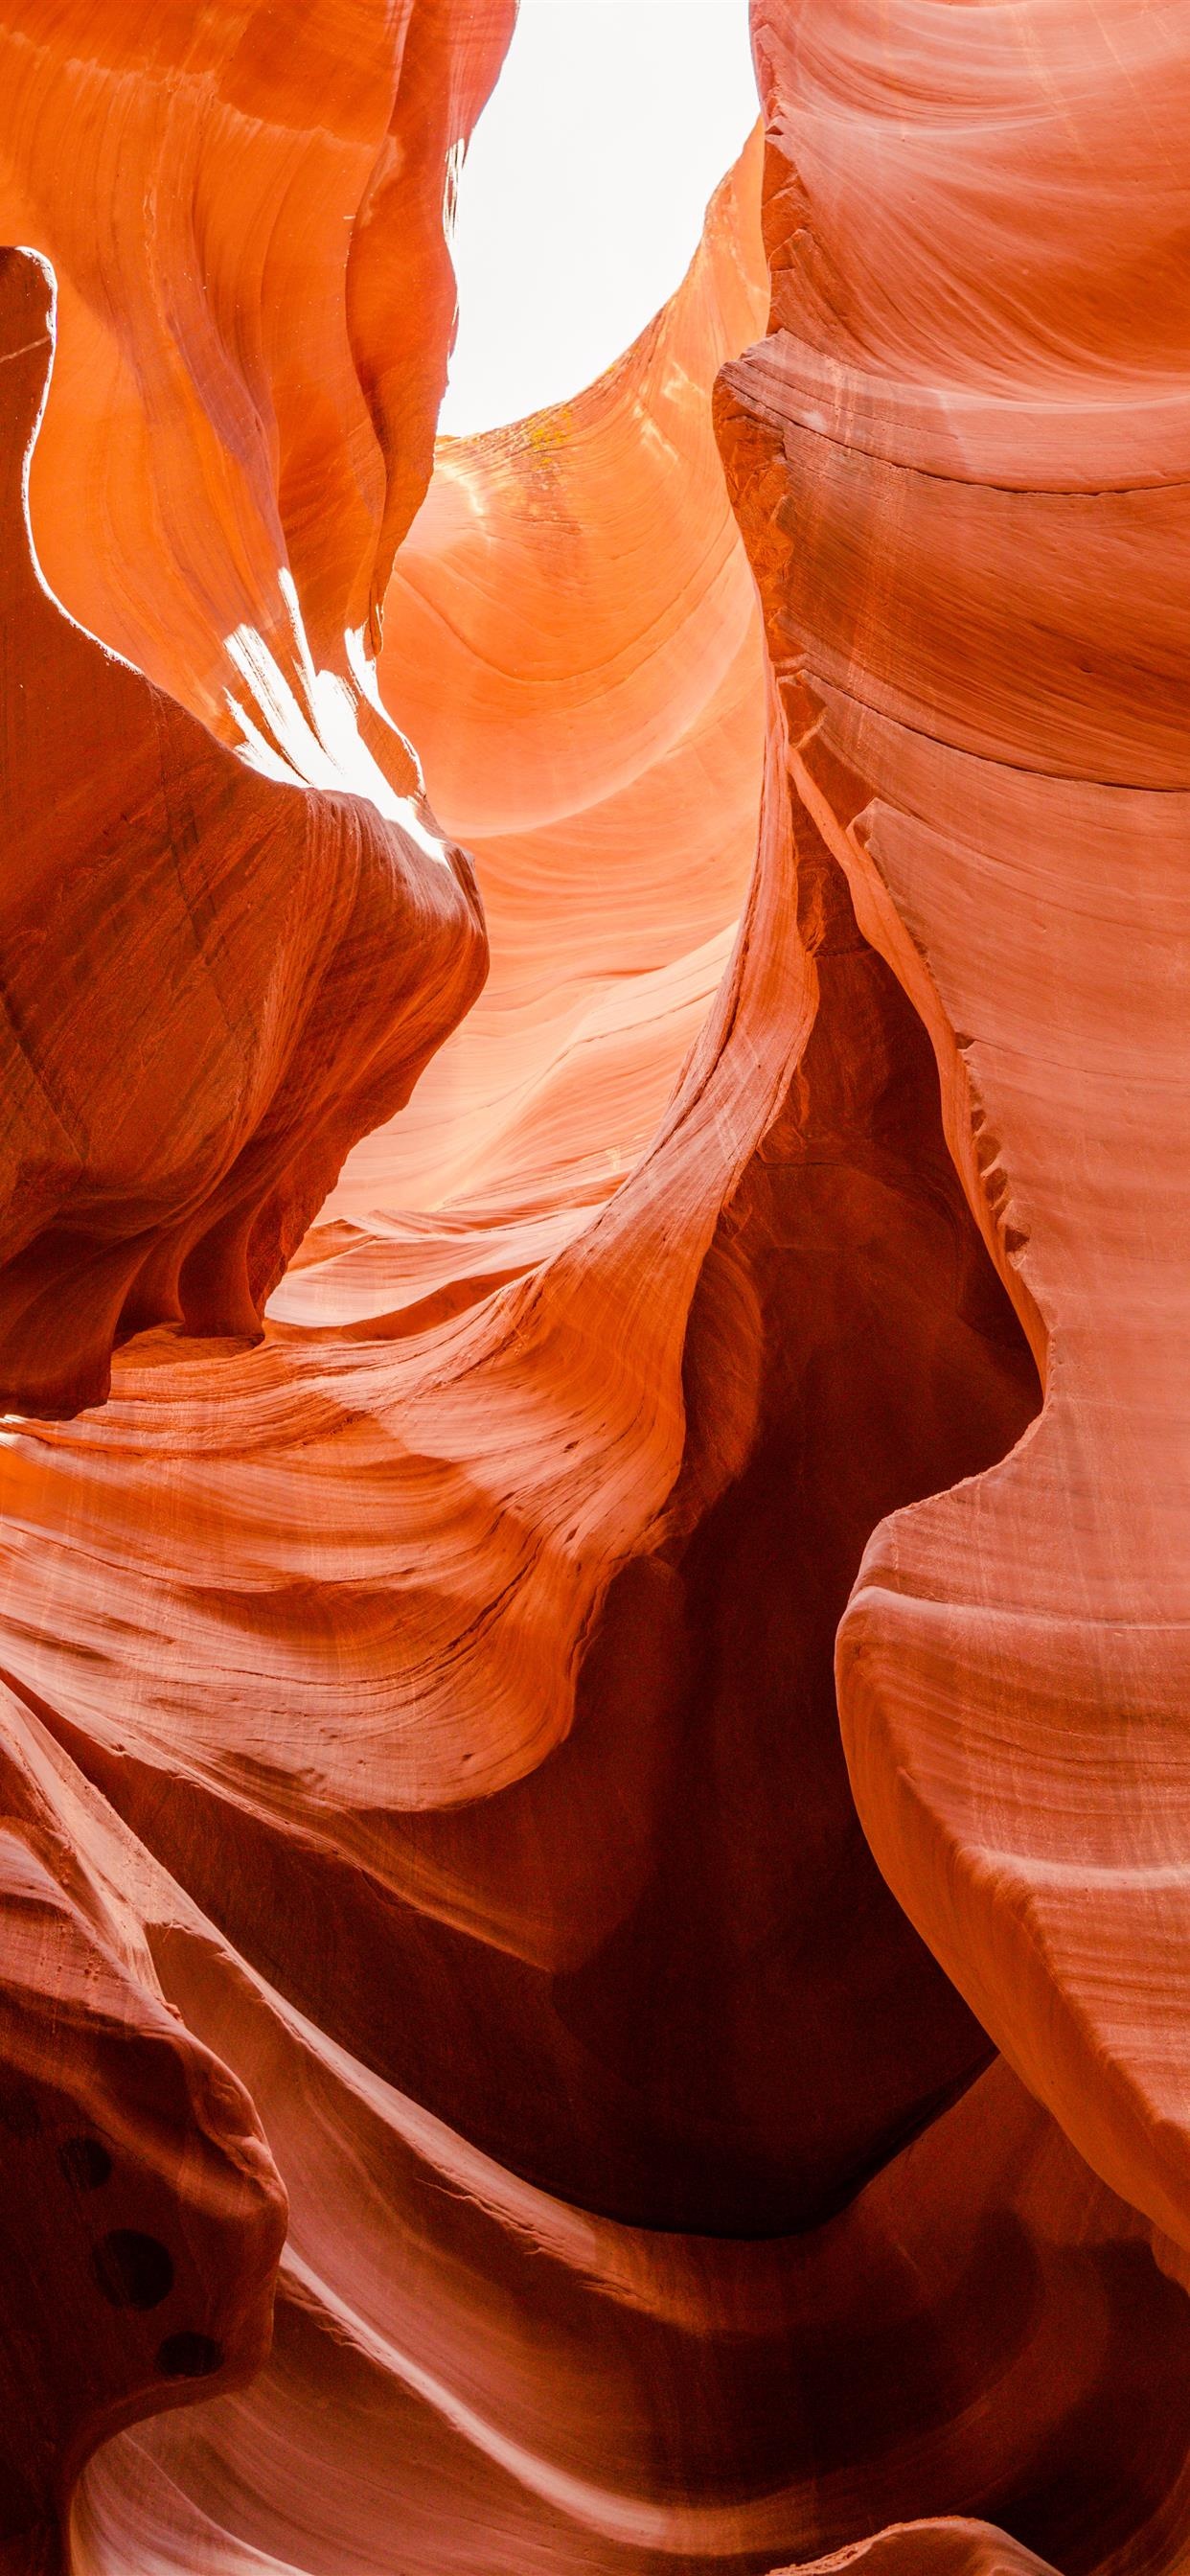 Canyon iPhone wallpapers, Nature's wonders, Majestic landscapes, Breathtaking views, 1250x2690 HD Phone